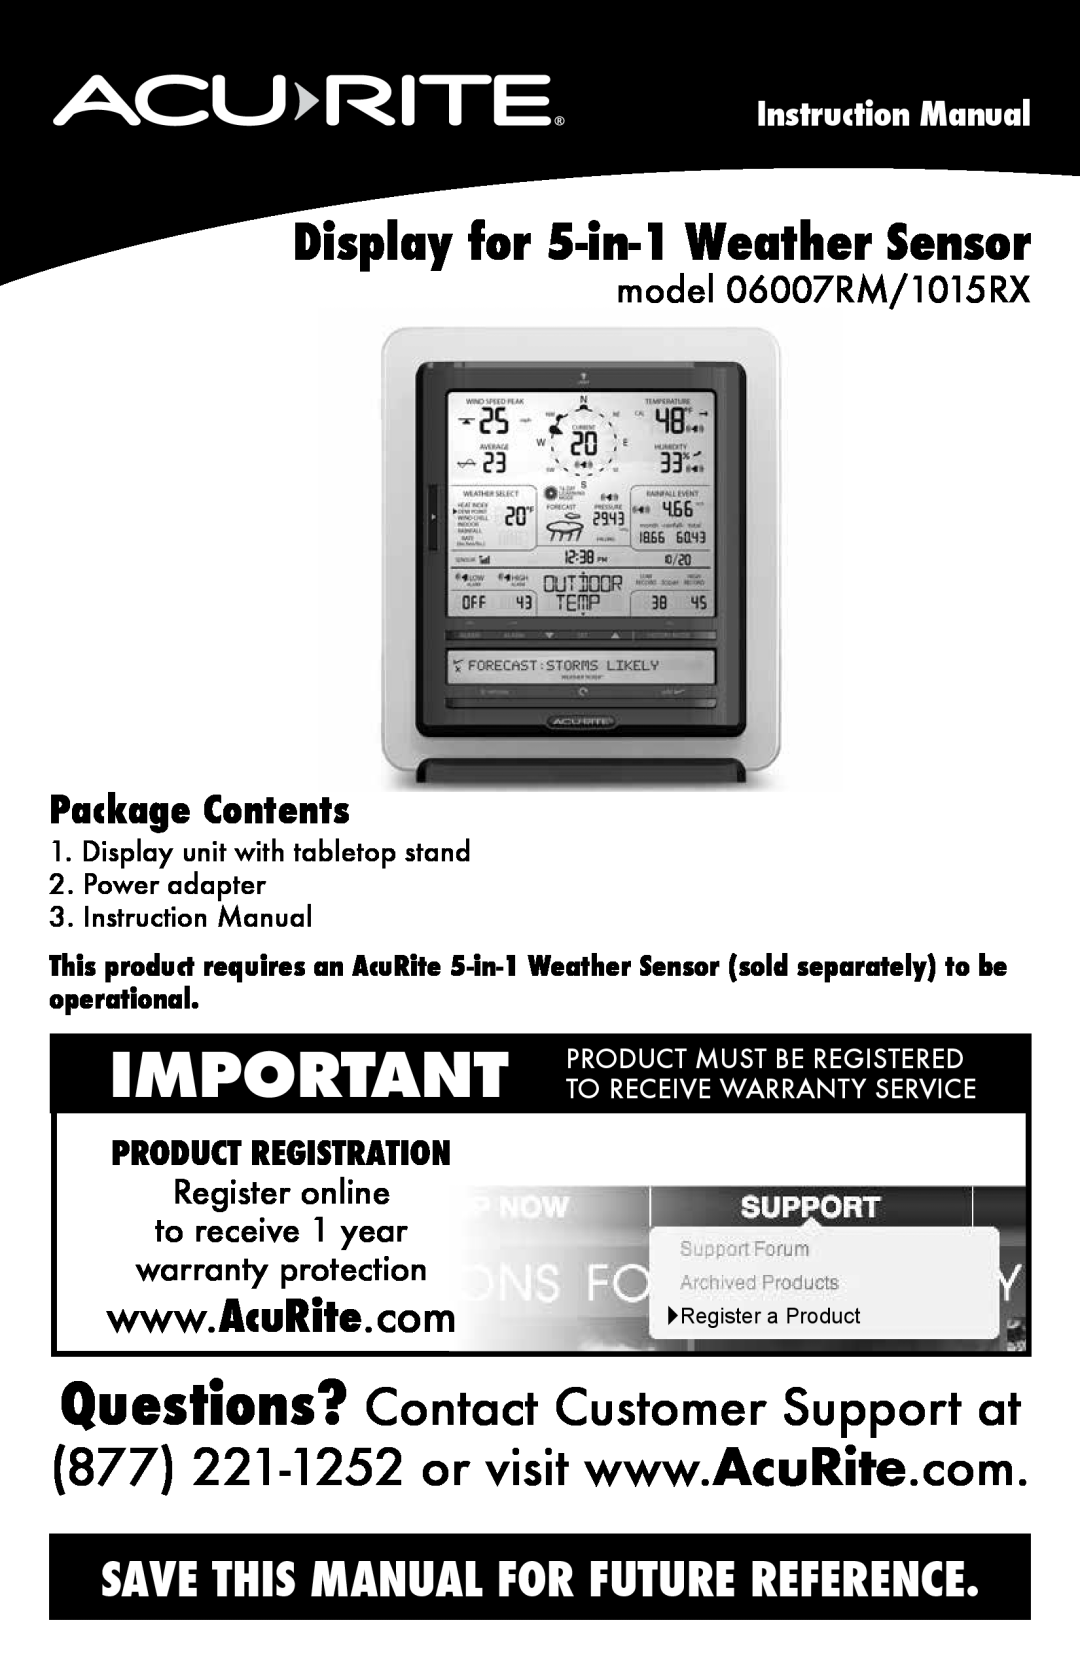 Acu-Rite 06007RM/1015RX instruction manual Package Contents, Product Must Be Registered, To Receive Warranty Service 